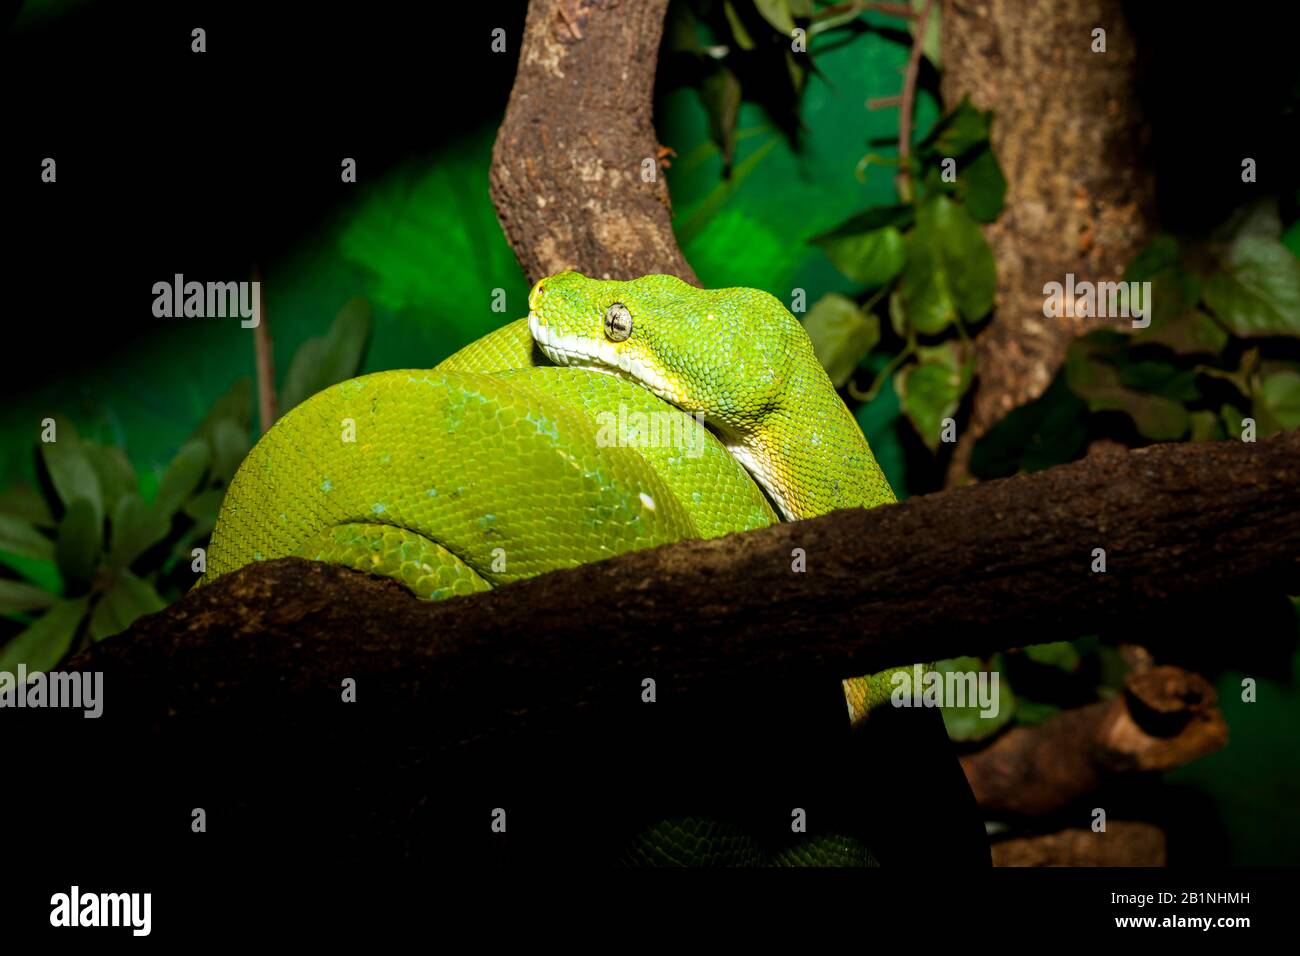 The green tree python, is a species of python native to New Guinea, islands in Indonesia, and Cape York Peninsula in Australia. Described by Hermann S Stock Photo